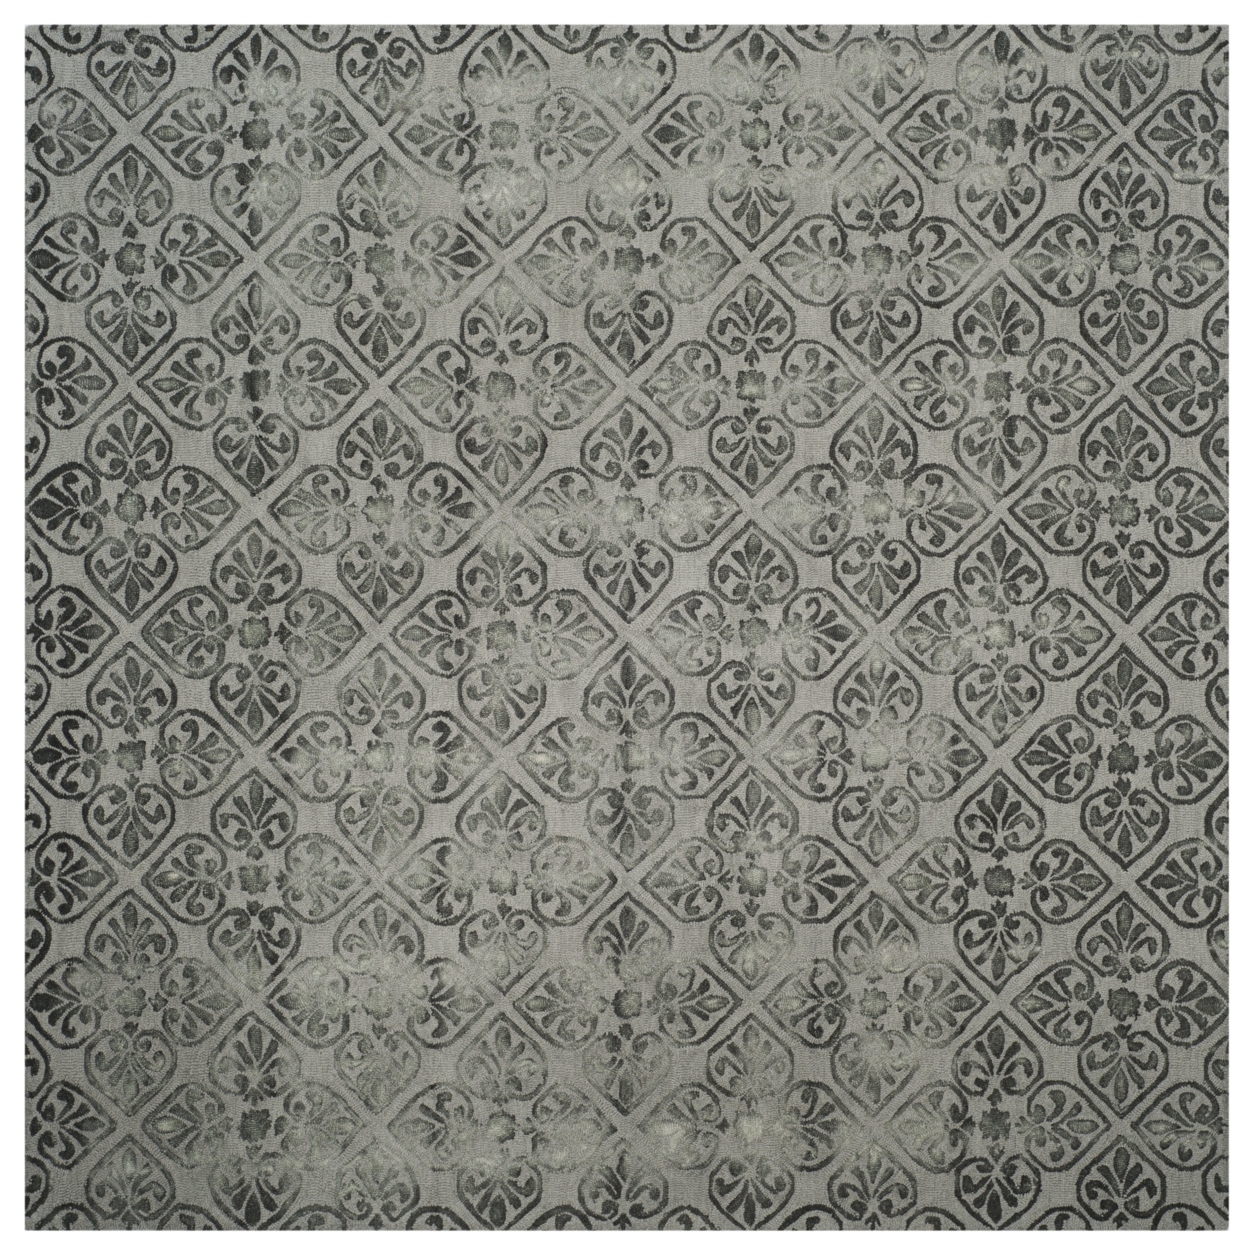 SAFAVIEH Dip Dye Collection DDY101A Handmade Grey Rug - 7' Square